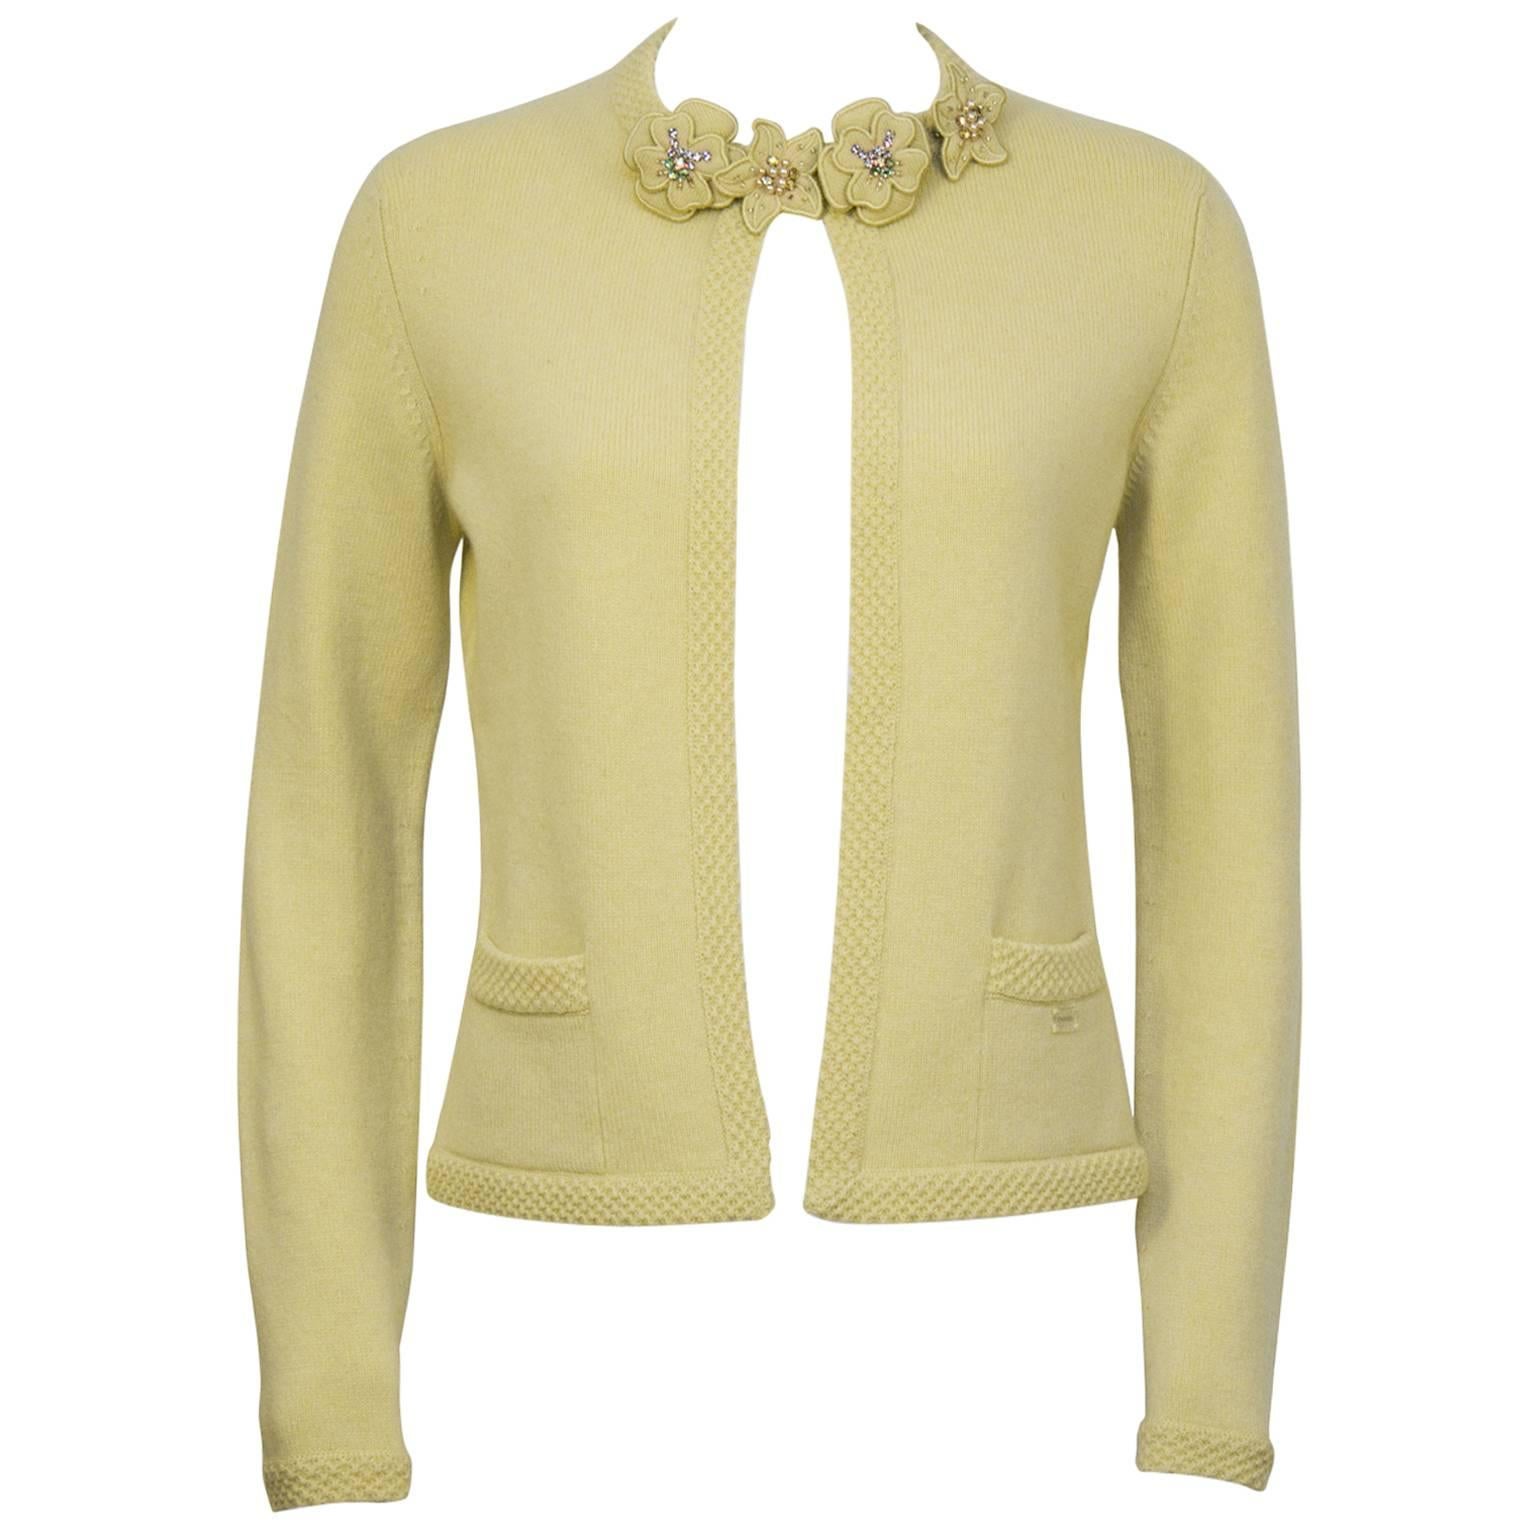 Spring 2005 Chanel  Butter Yellow Cashmere Cardigan